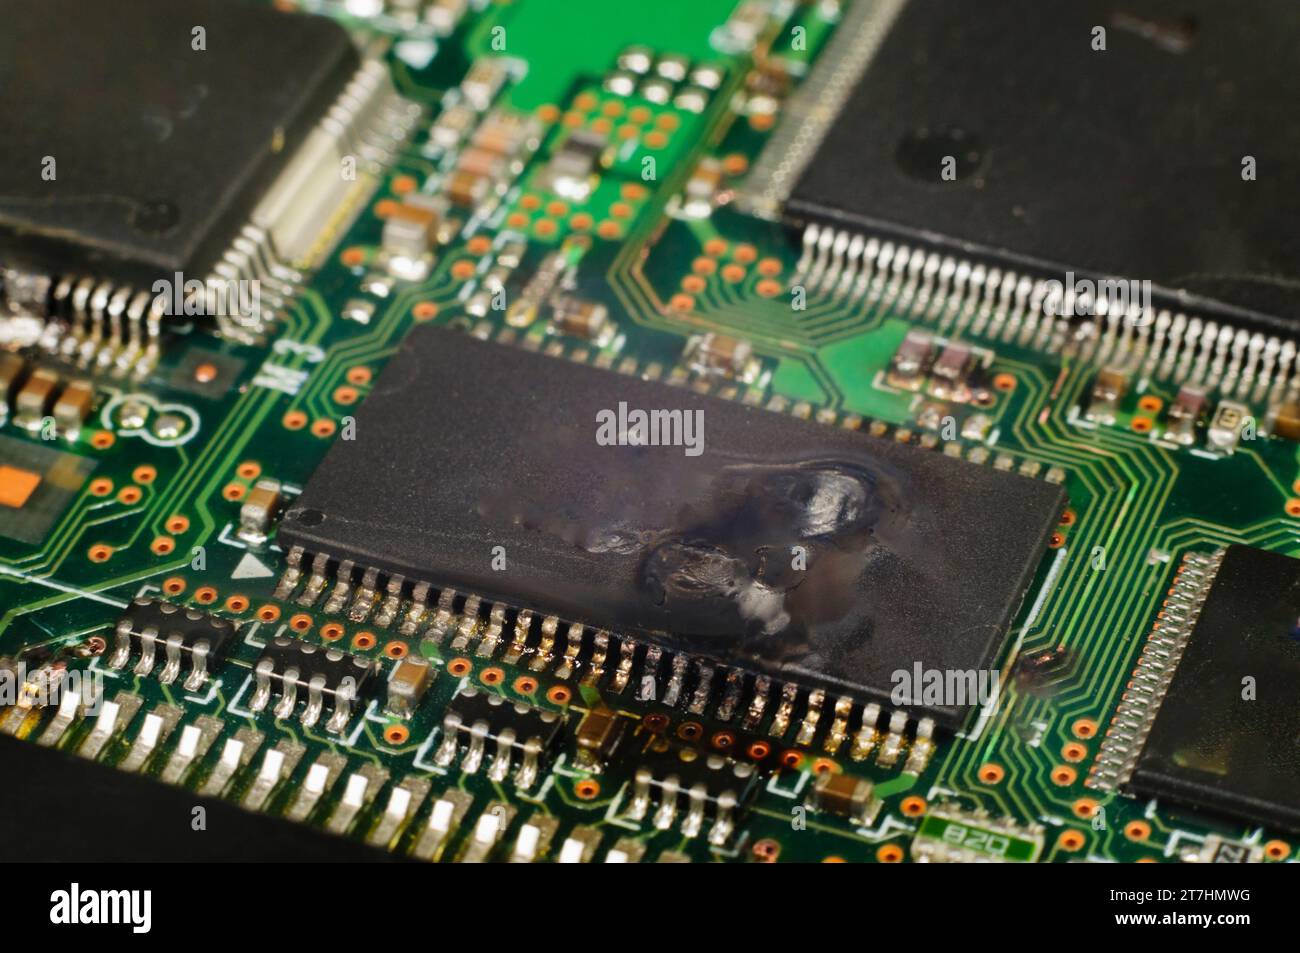 Electronic integrated circuit (IC) on a computer PCB after suffering a ...